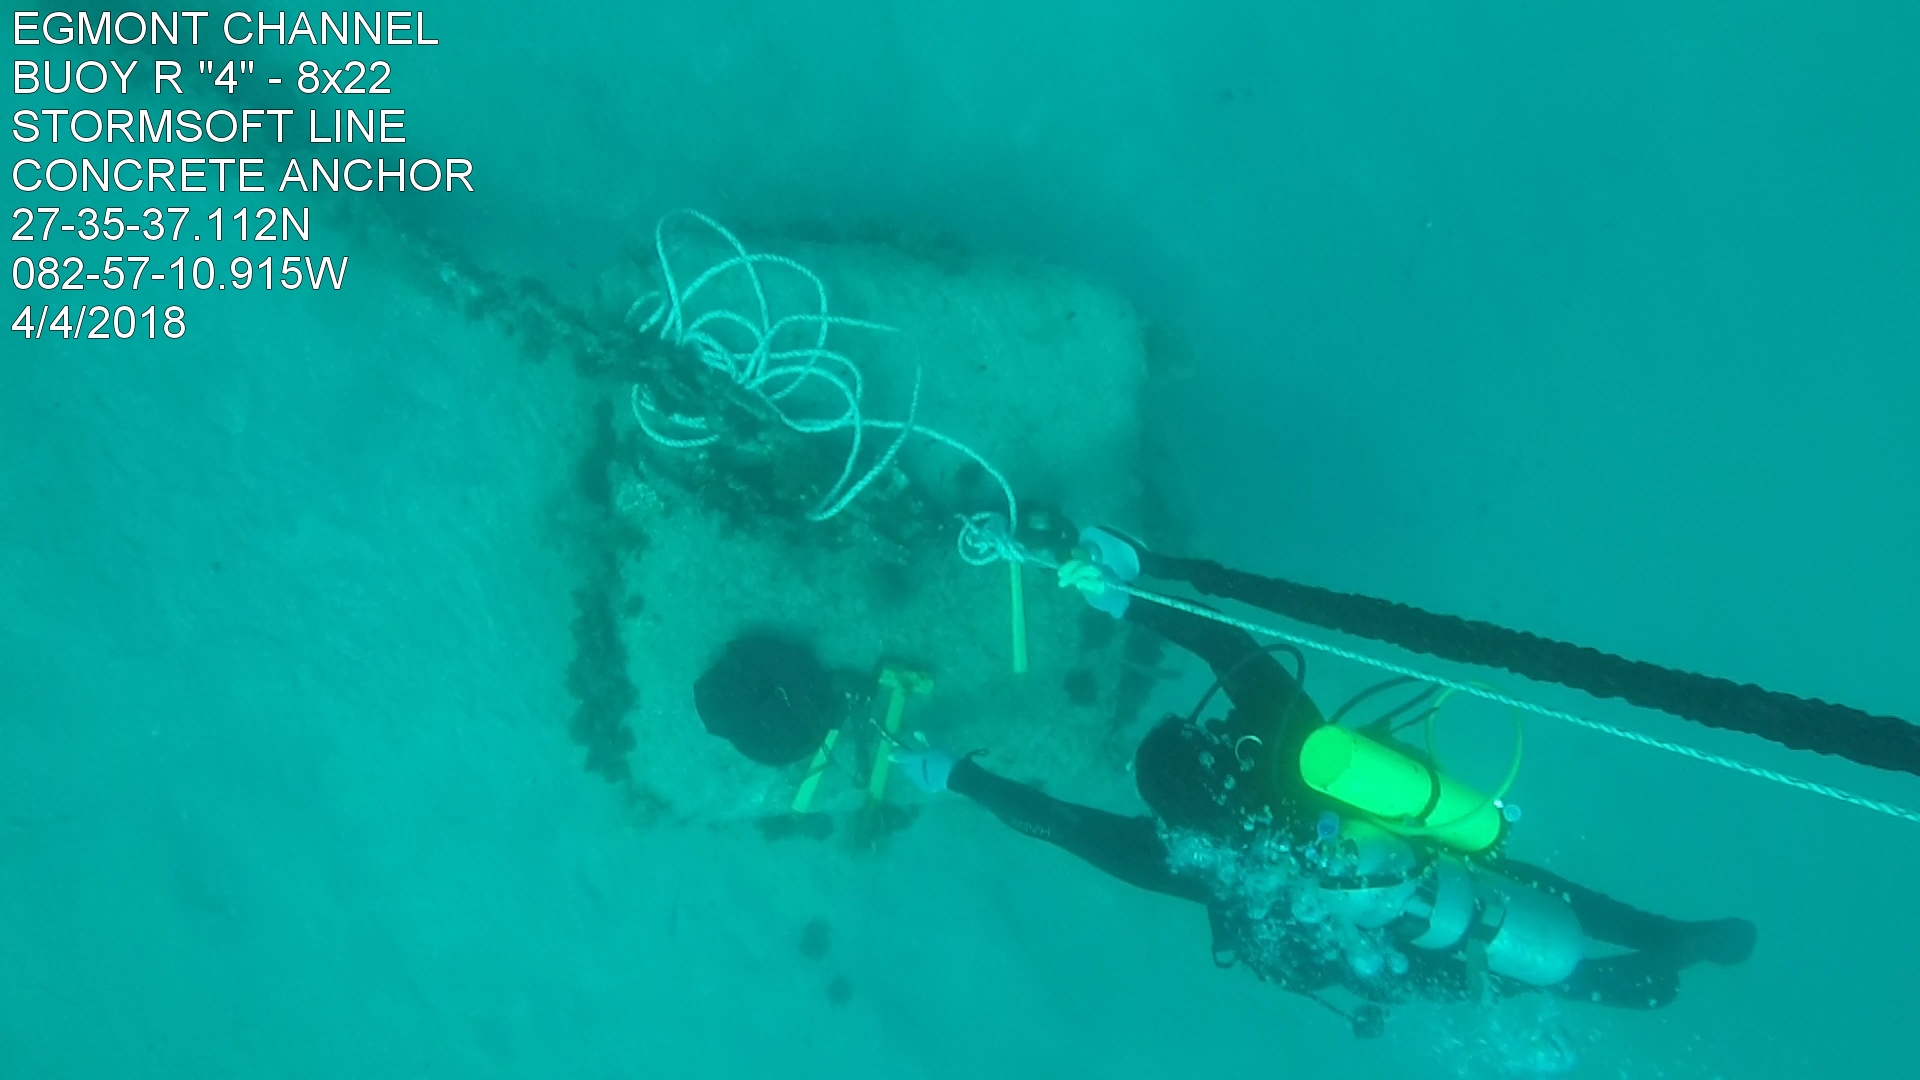 A look from above, a diver attaches a StormSoft eco-mooring line to a concrete sinker. Underwater location: EGMONT CHannel; BUOY R "4" - 8x22; STORMSOFT LINE; CONCRETE ANCHOR; 27-35-37.112n; OB2-57-10.915W; 4/4/2018